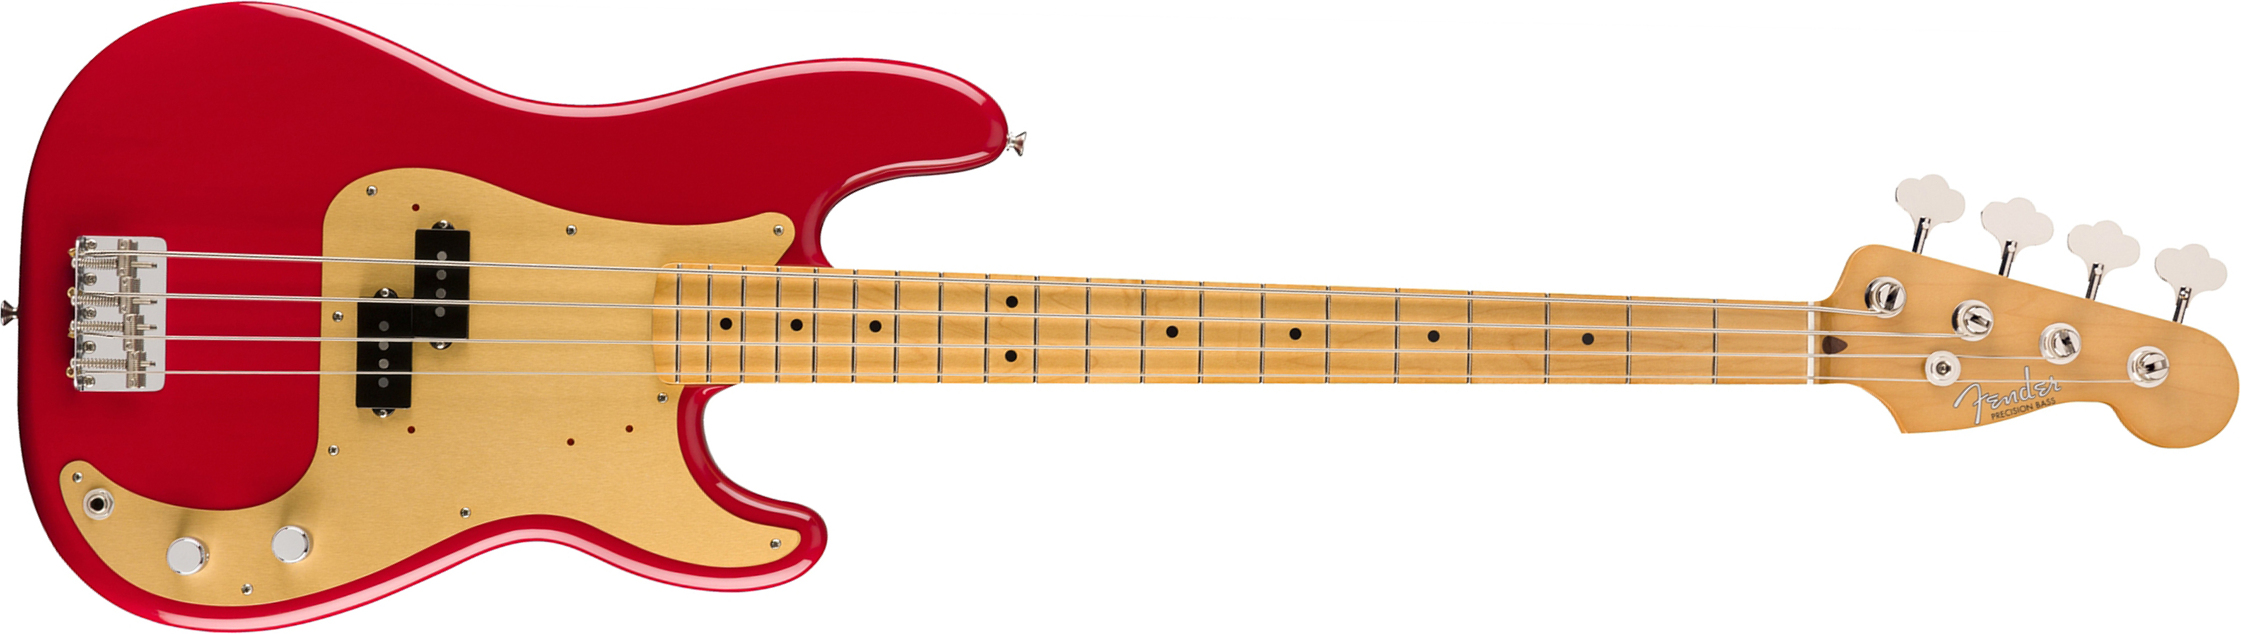 Fender Precision Bass 50s Vintera Vintage Mex Mn - Dakota Red - Solid body electric bass - Main picture